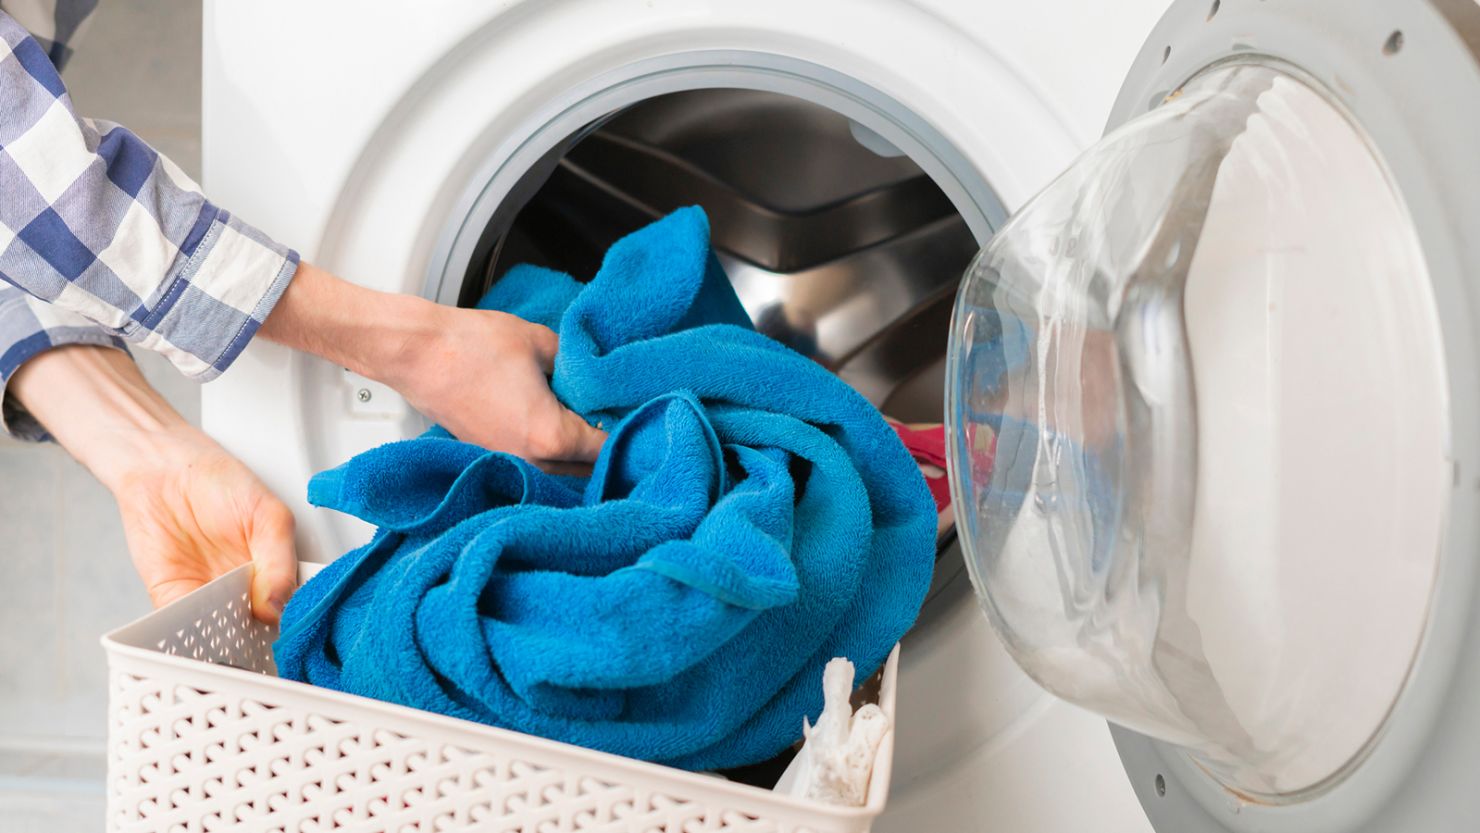 Wet Wiping Cloths Should Be Laundered How Often: Expert Advice